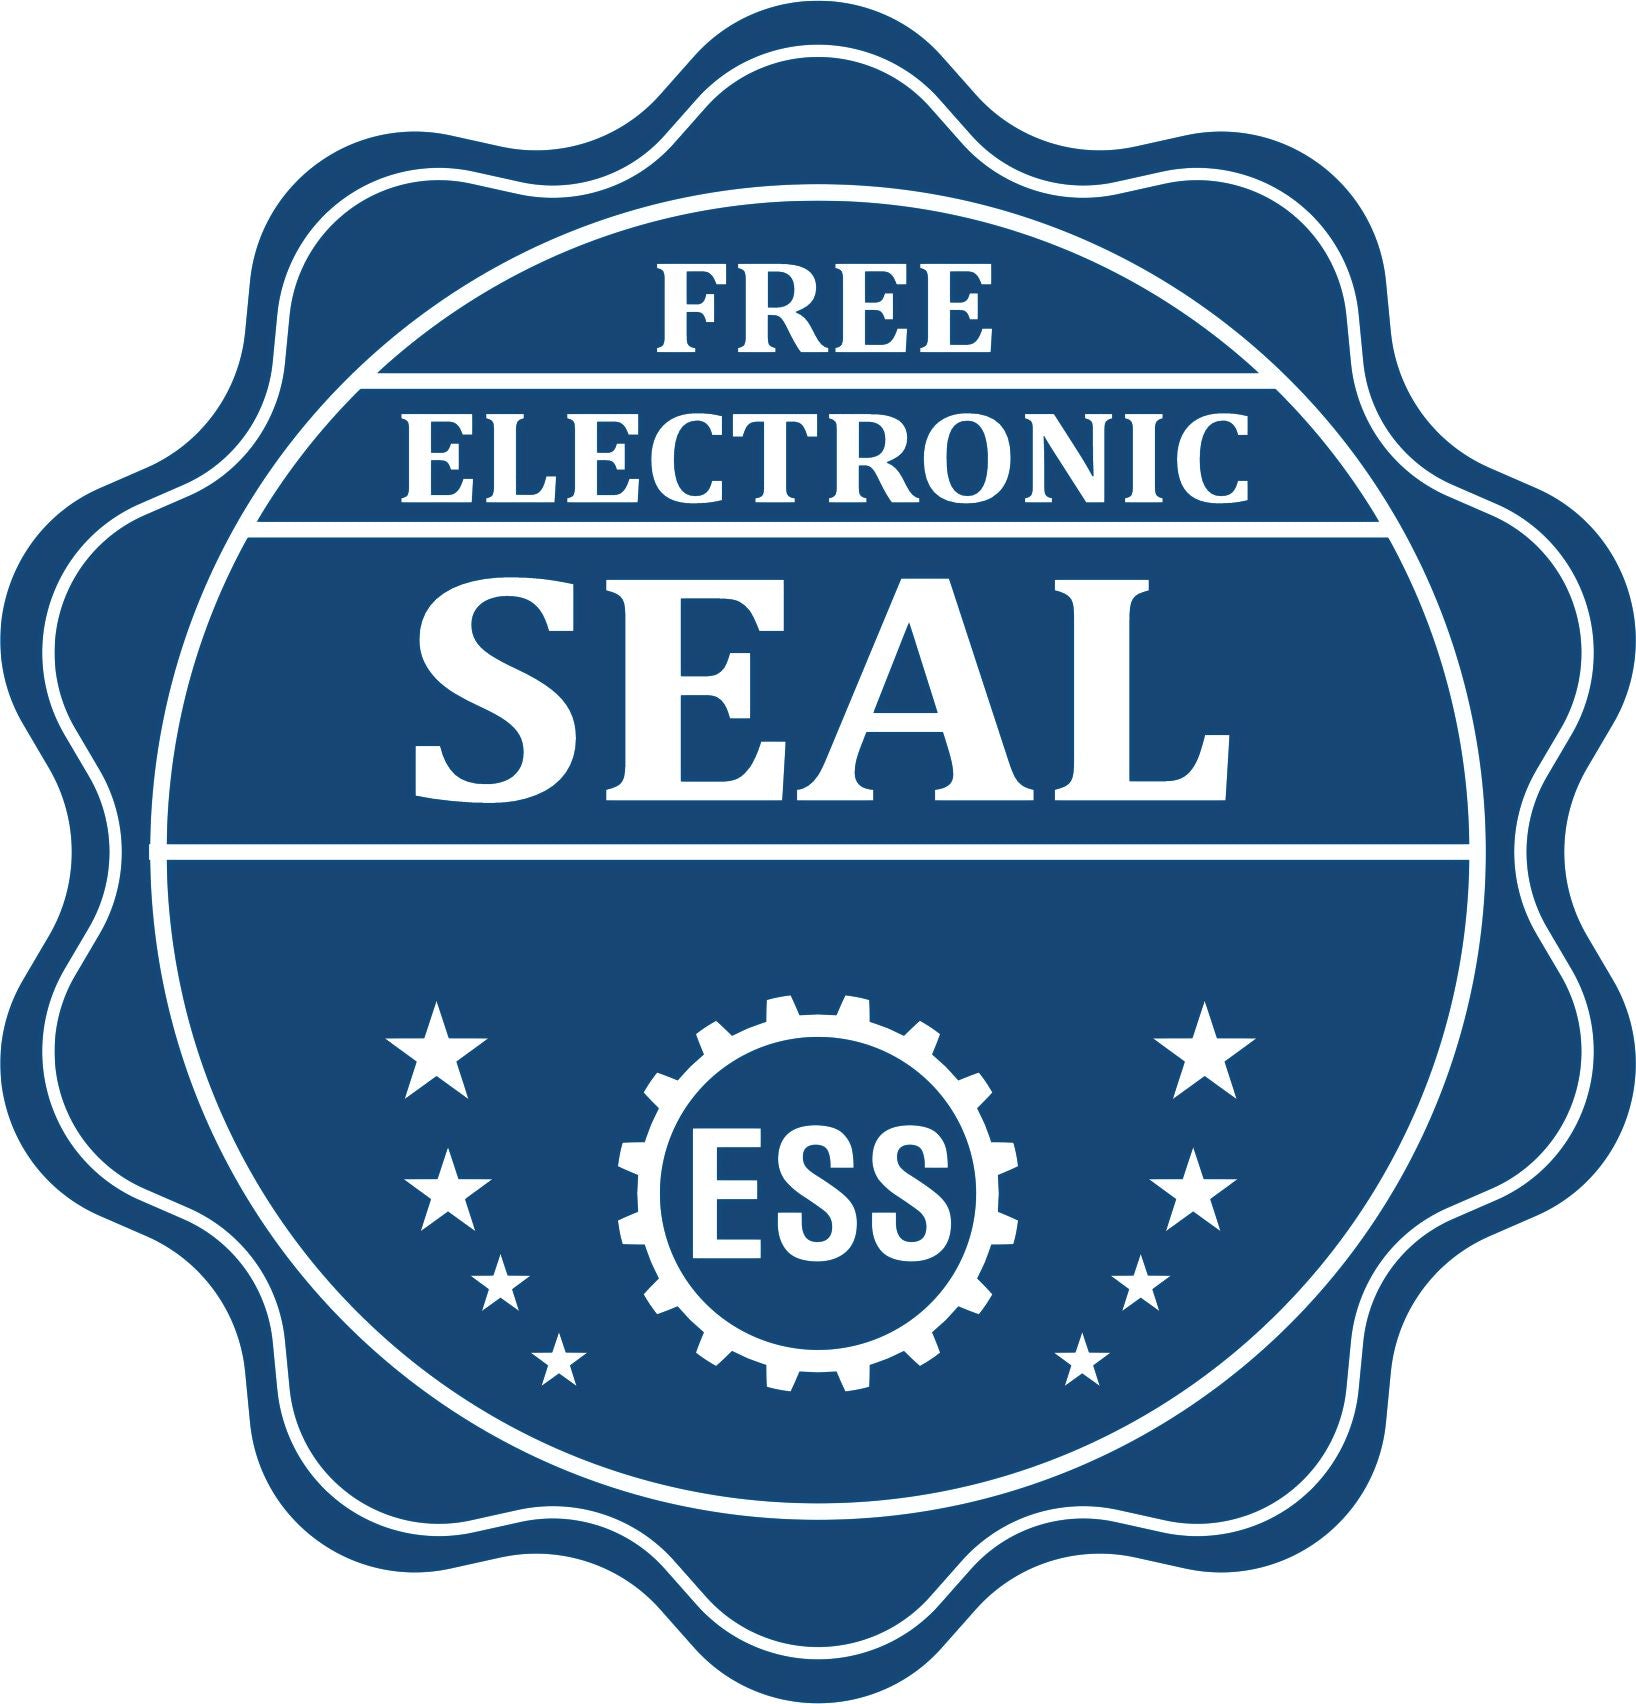 A badge showing a free electronic seal for the Soft South Carolina Professional Engineer Seal with stars and the ESS gear on the emblem.